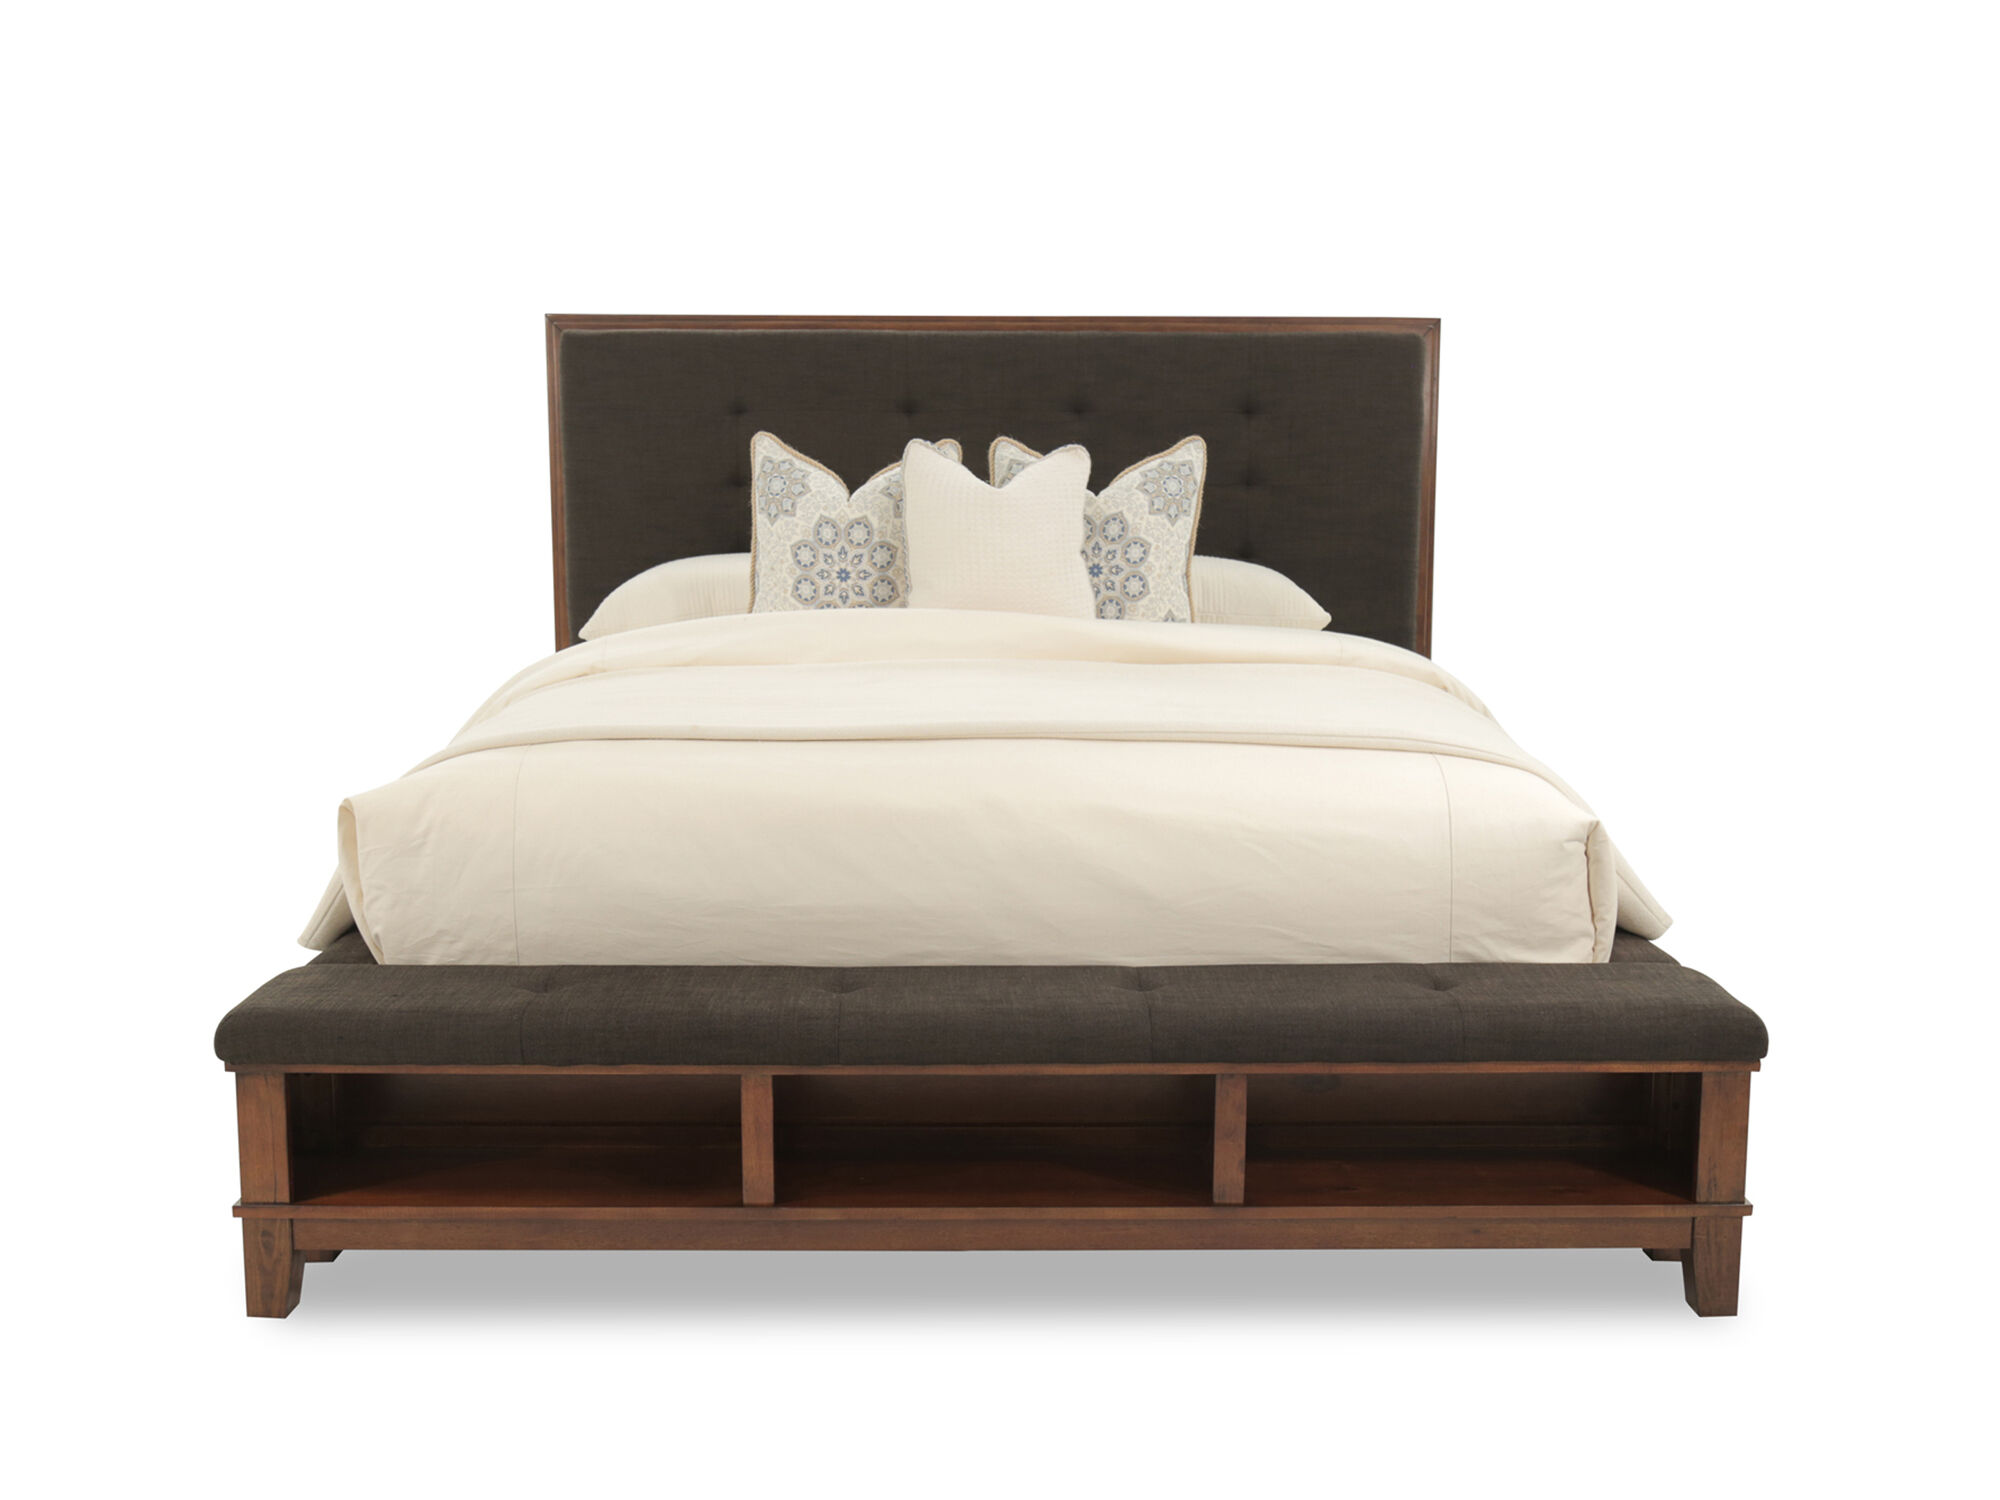 61 Contemporary Tufted Storage Bed In, Ashley King Premium Platform Bed Frame